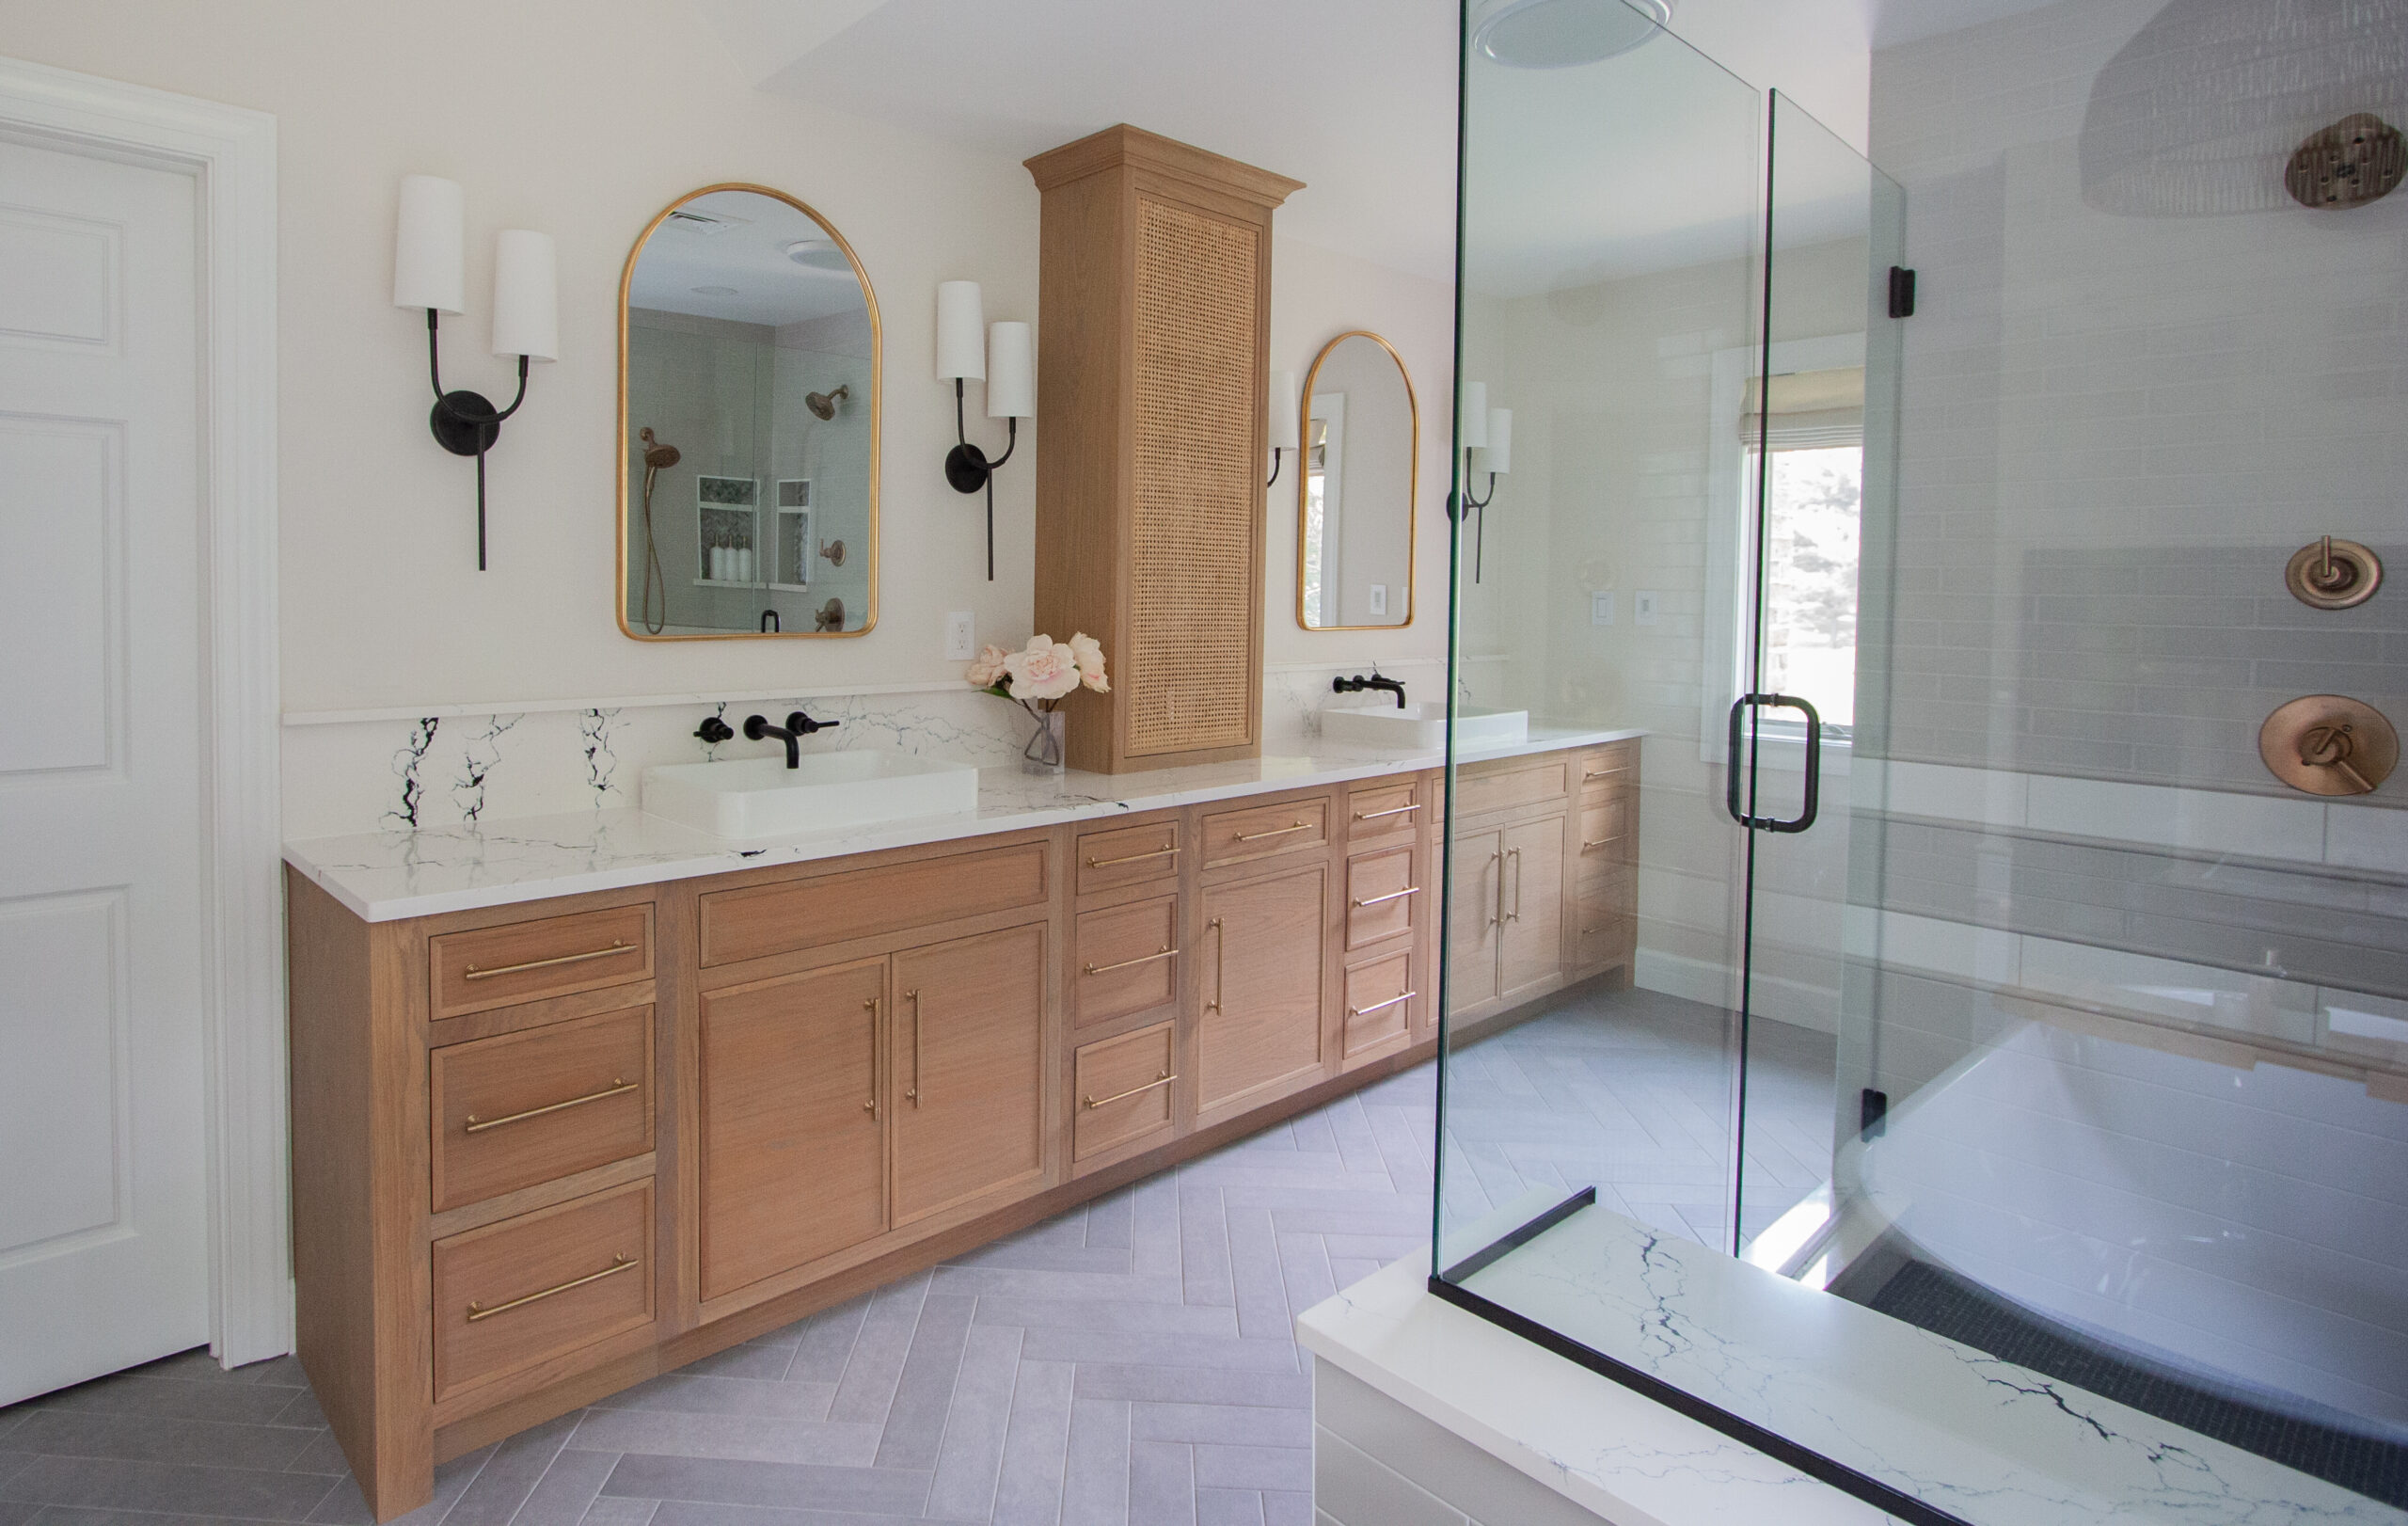 Local York County Bathroom Remodeling Experts